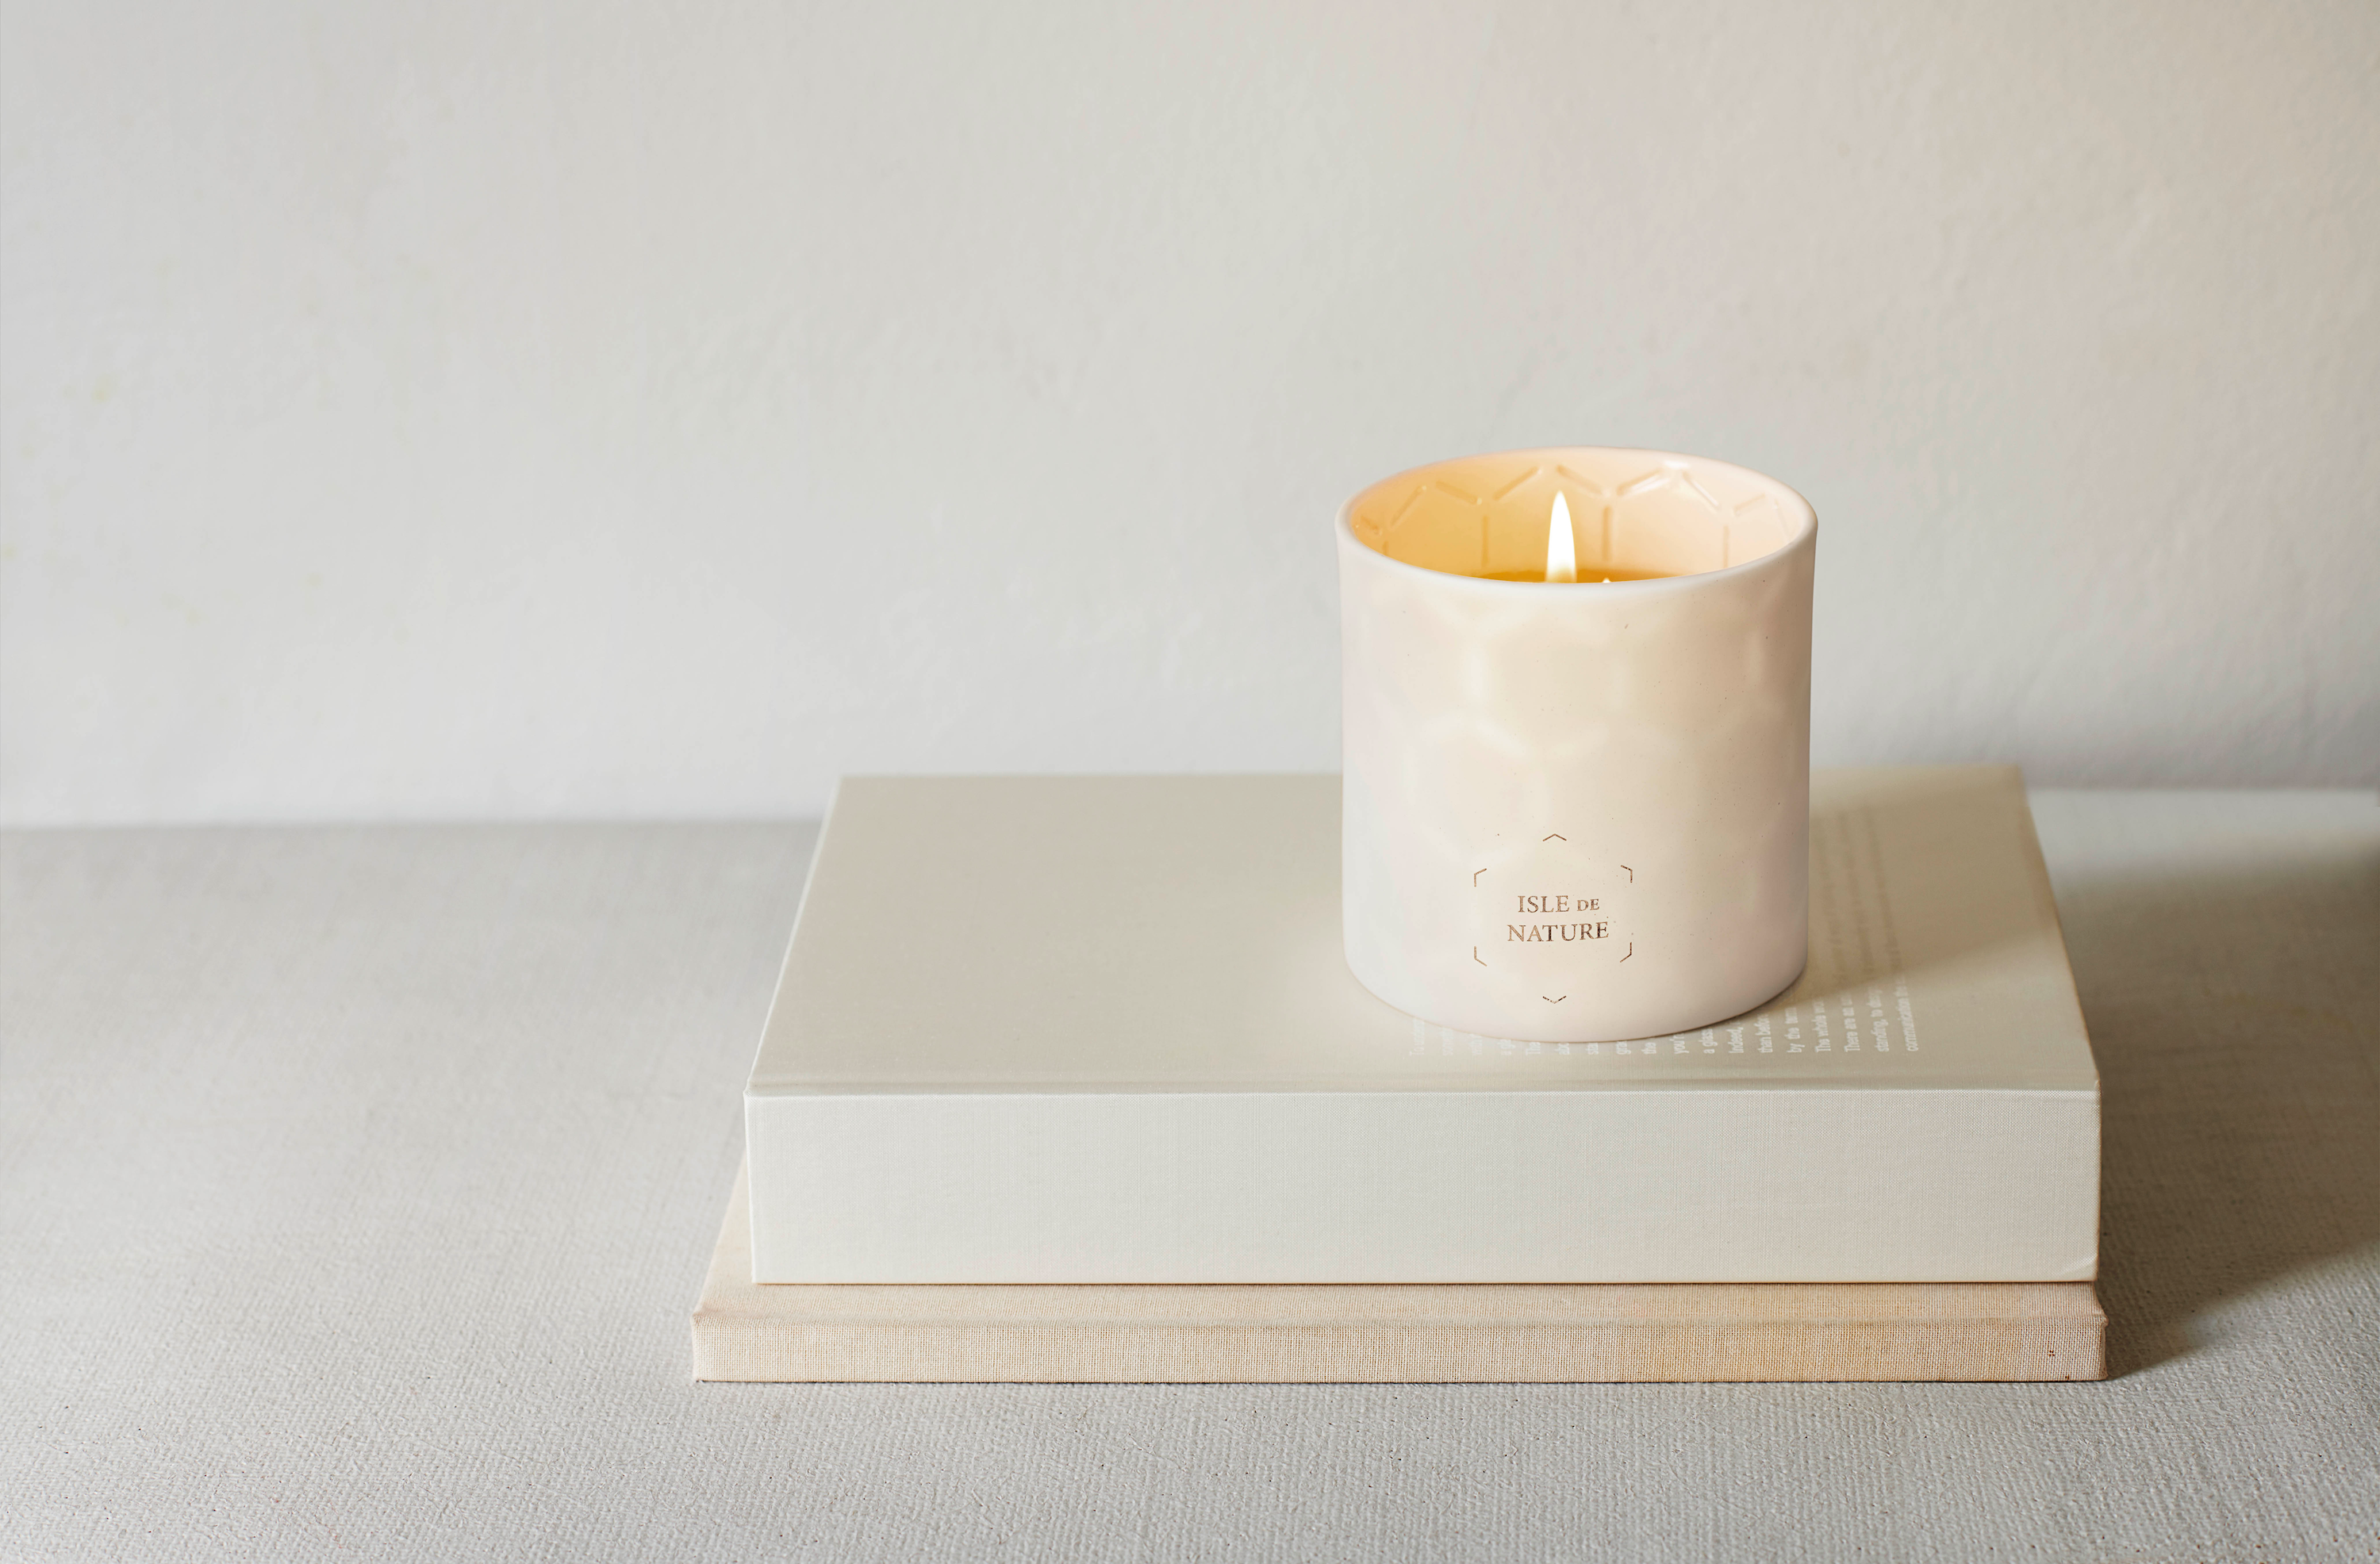 Pagua Bay Fragrance Luxury Beeswax Candle by Isle de Nature